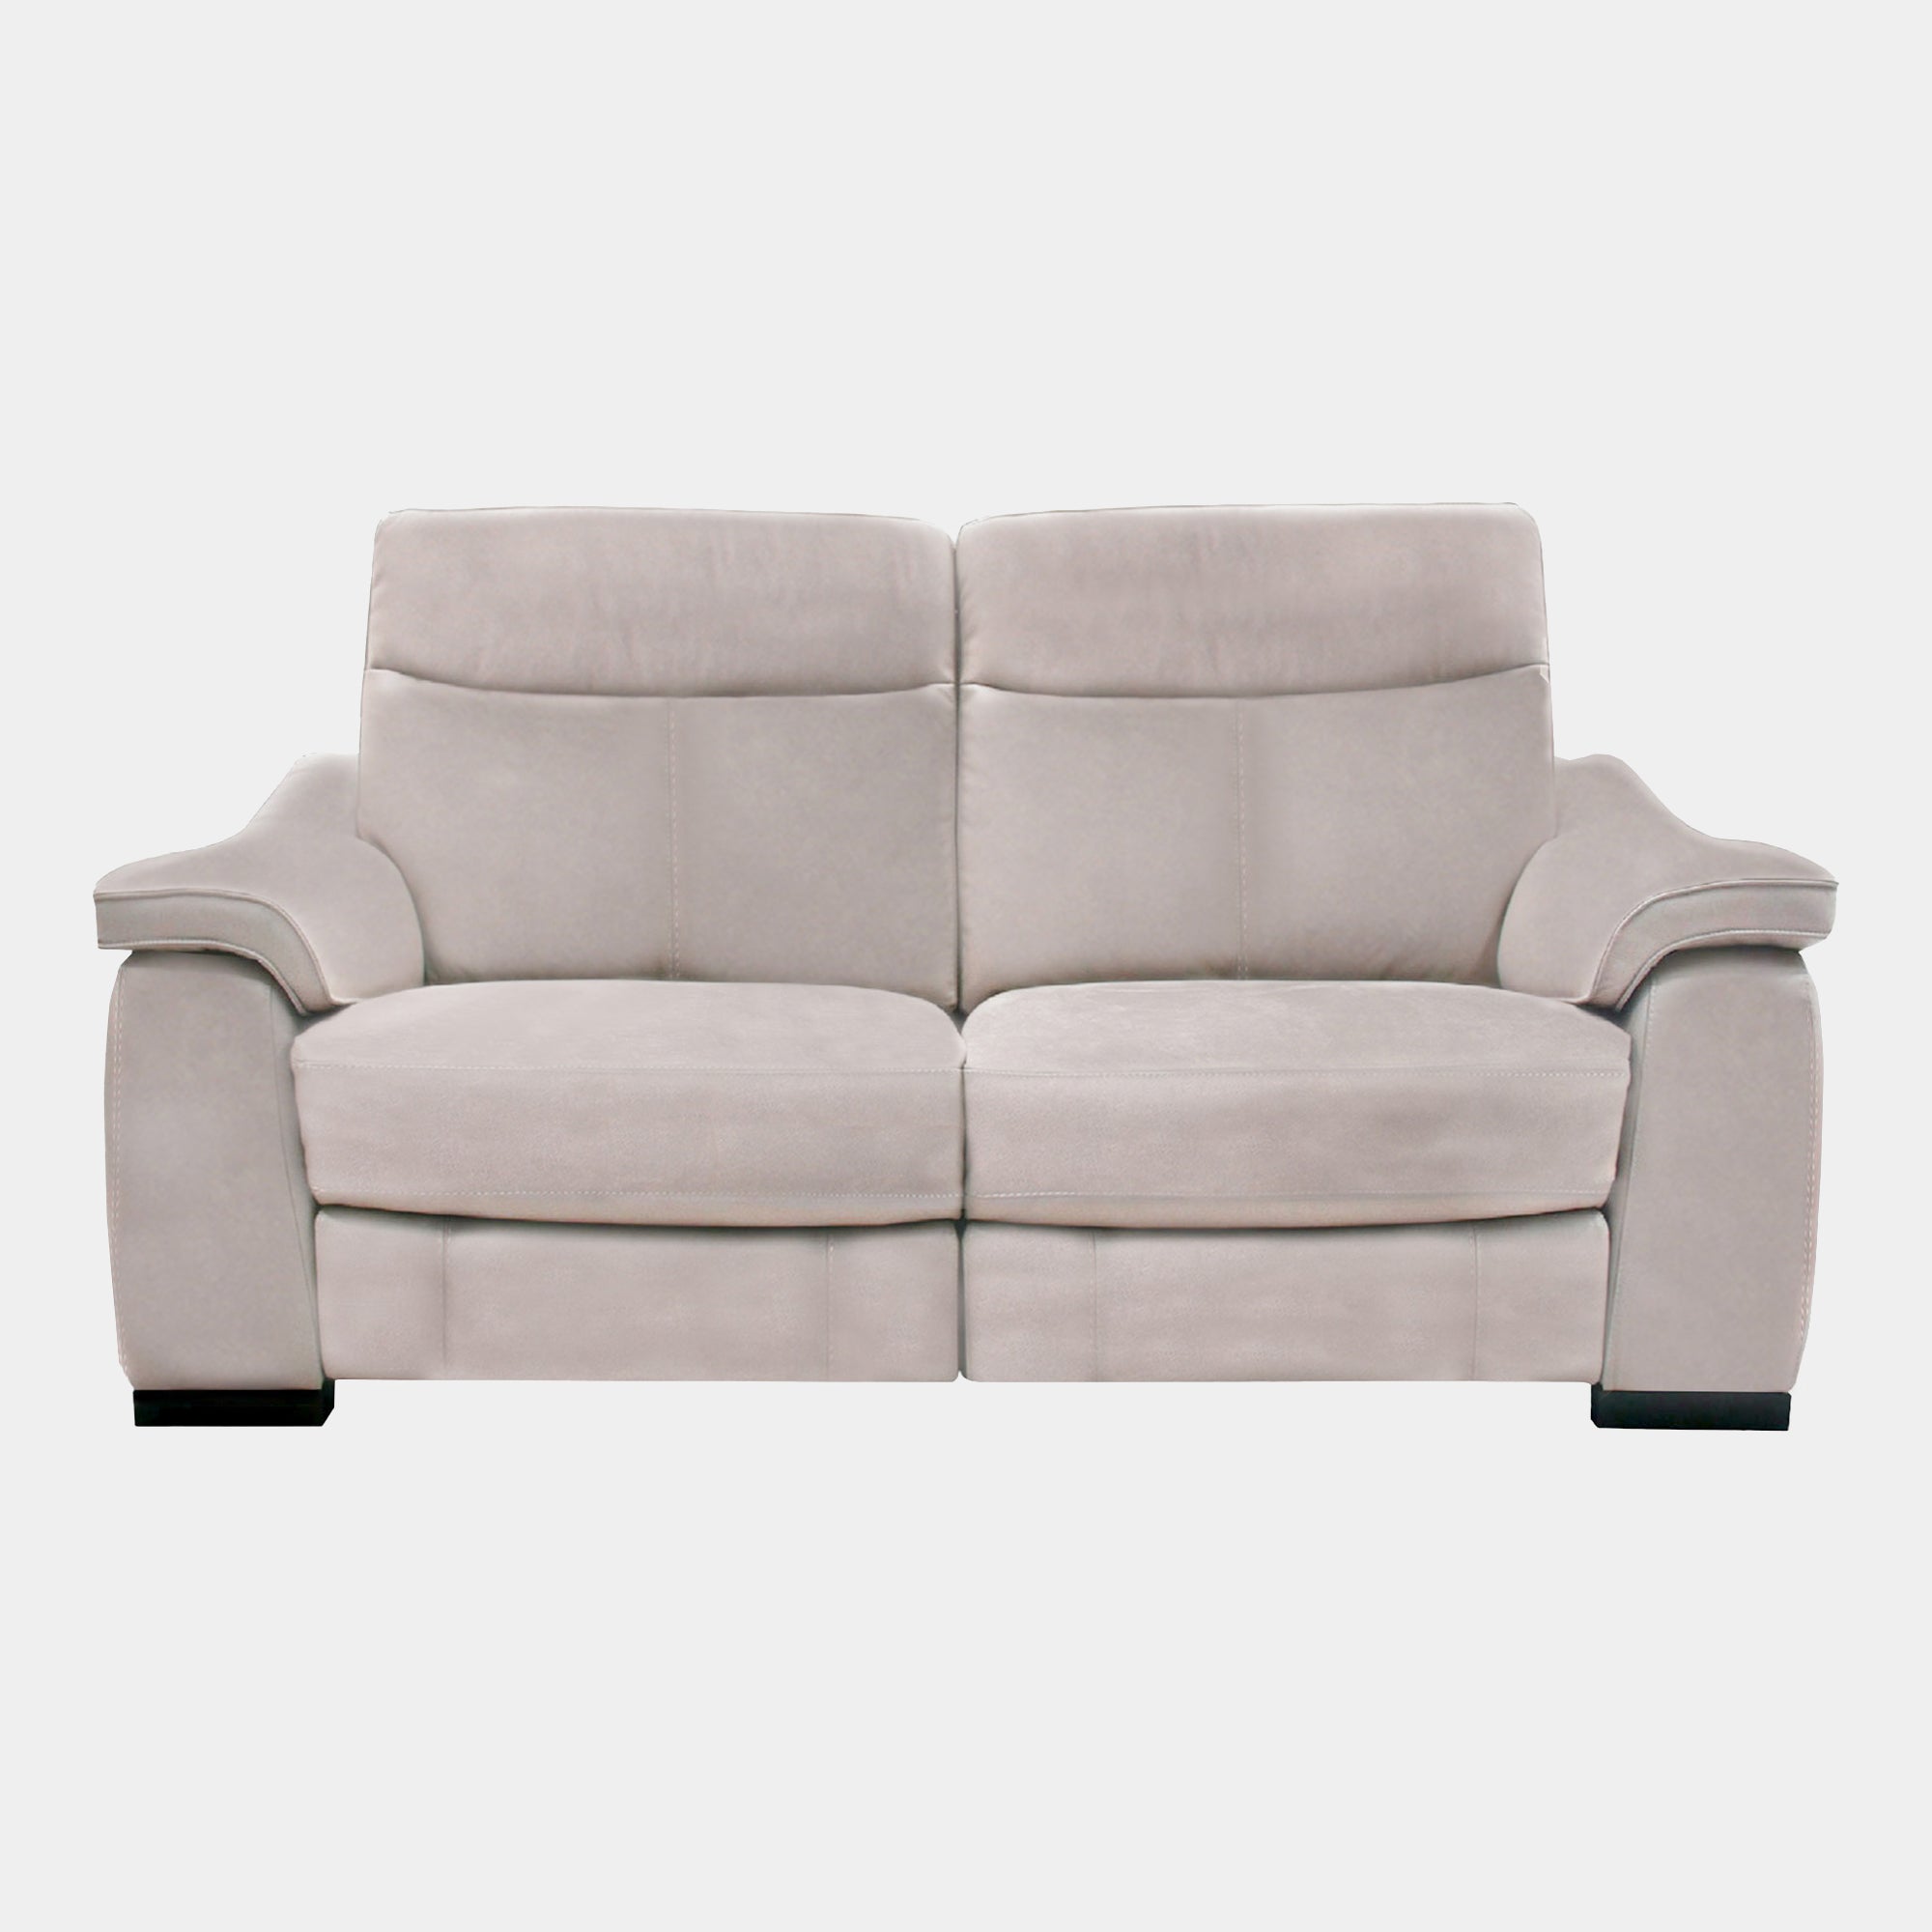 Caruso - 2.5 Seat Compact 2 Manual Recliner Sofa In Fabric Or Leather Fabric